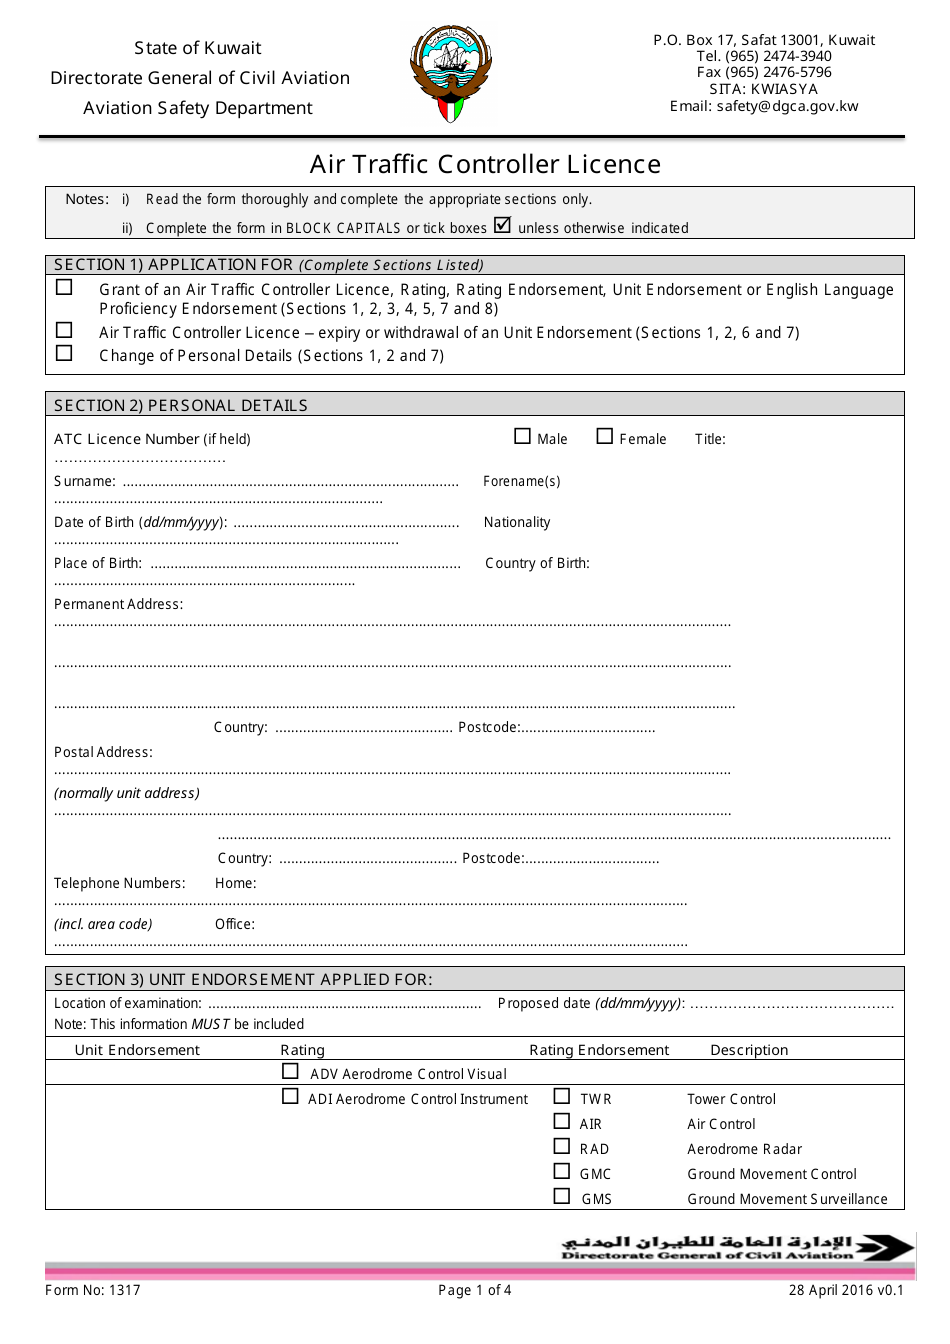 Form 1317 Air Traffic Controller Licence - Kuwait, Page 1